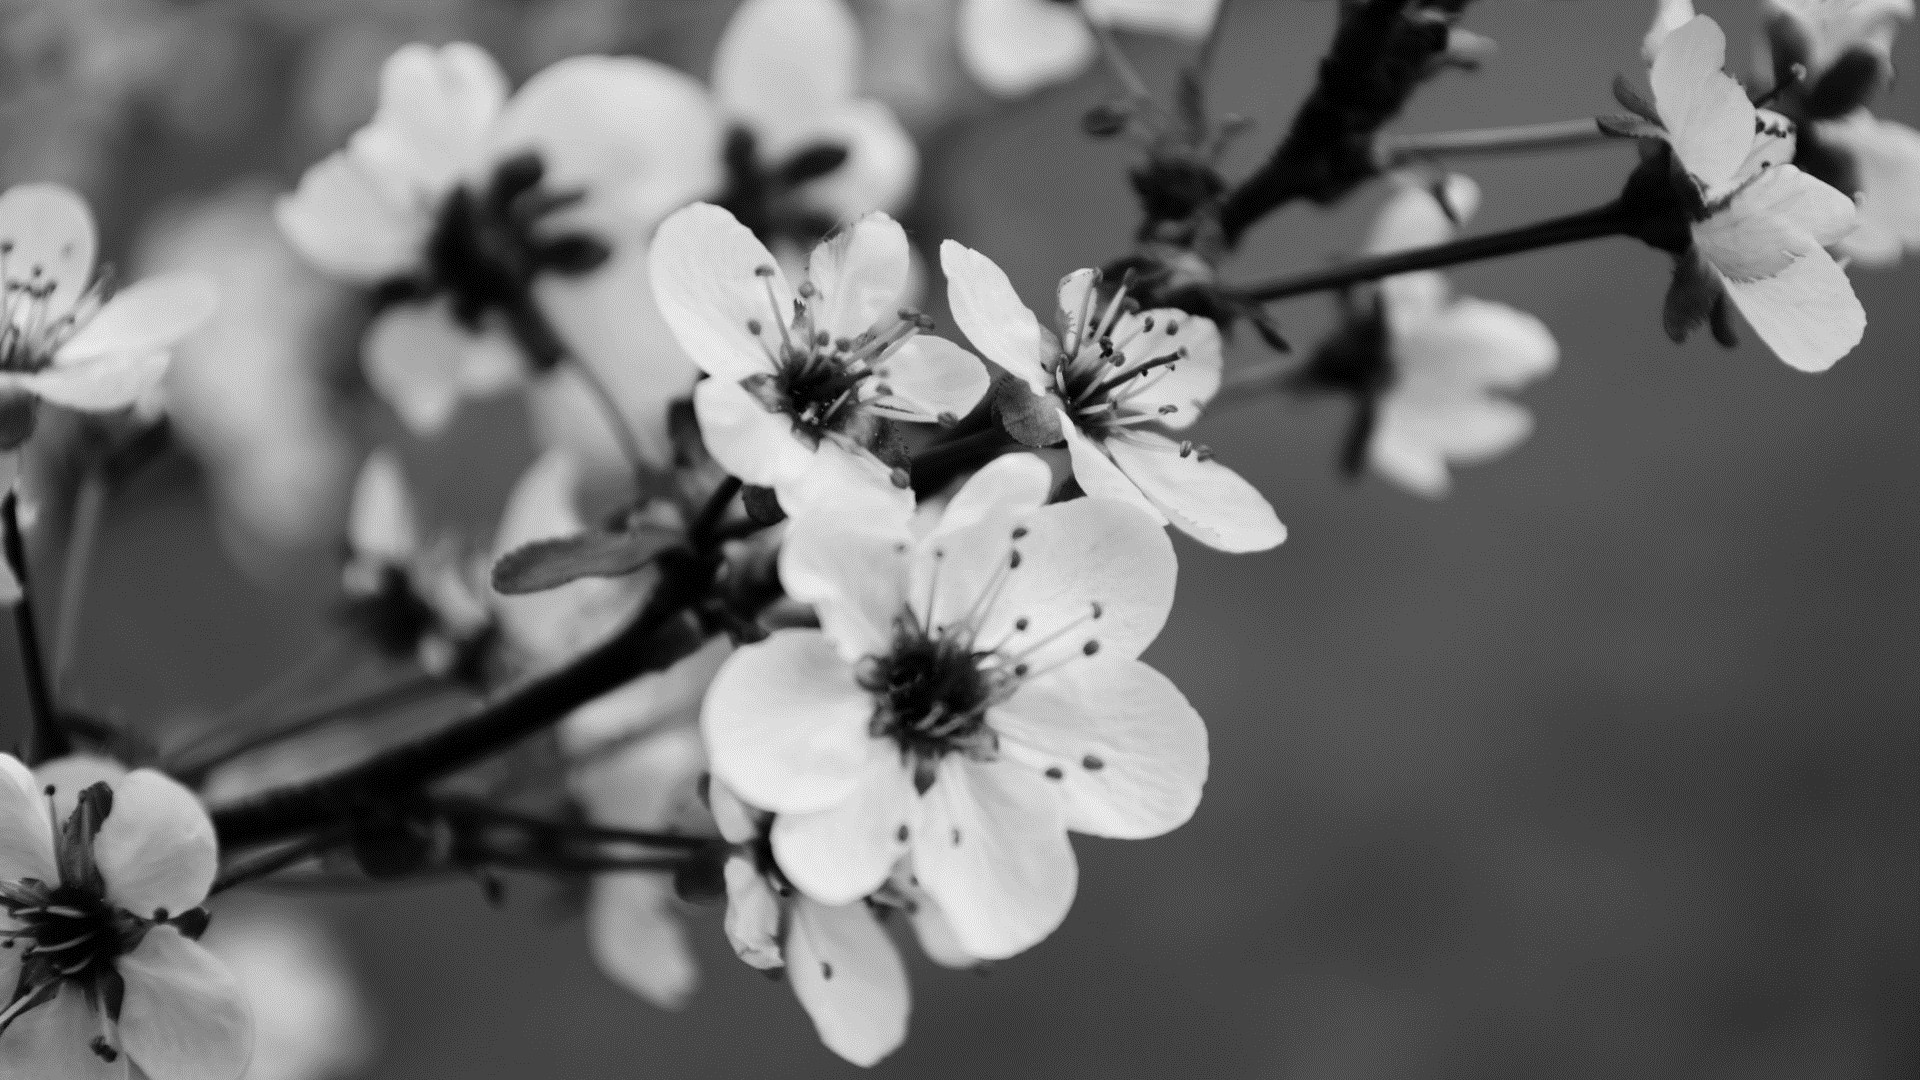 Black And White Floral Wallpaper